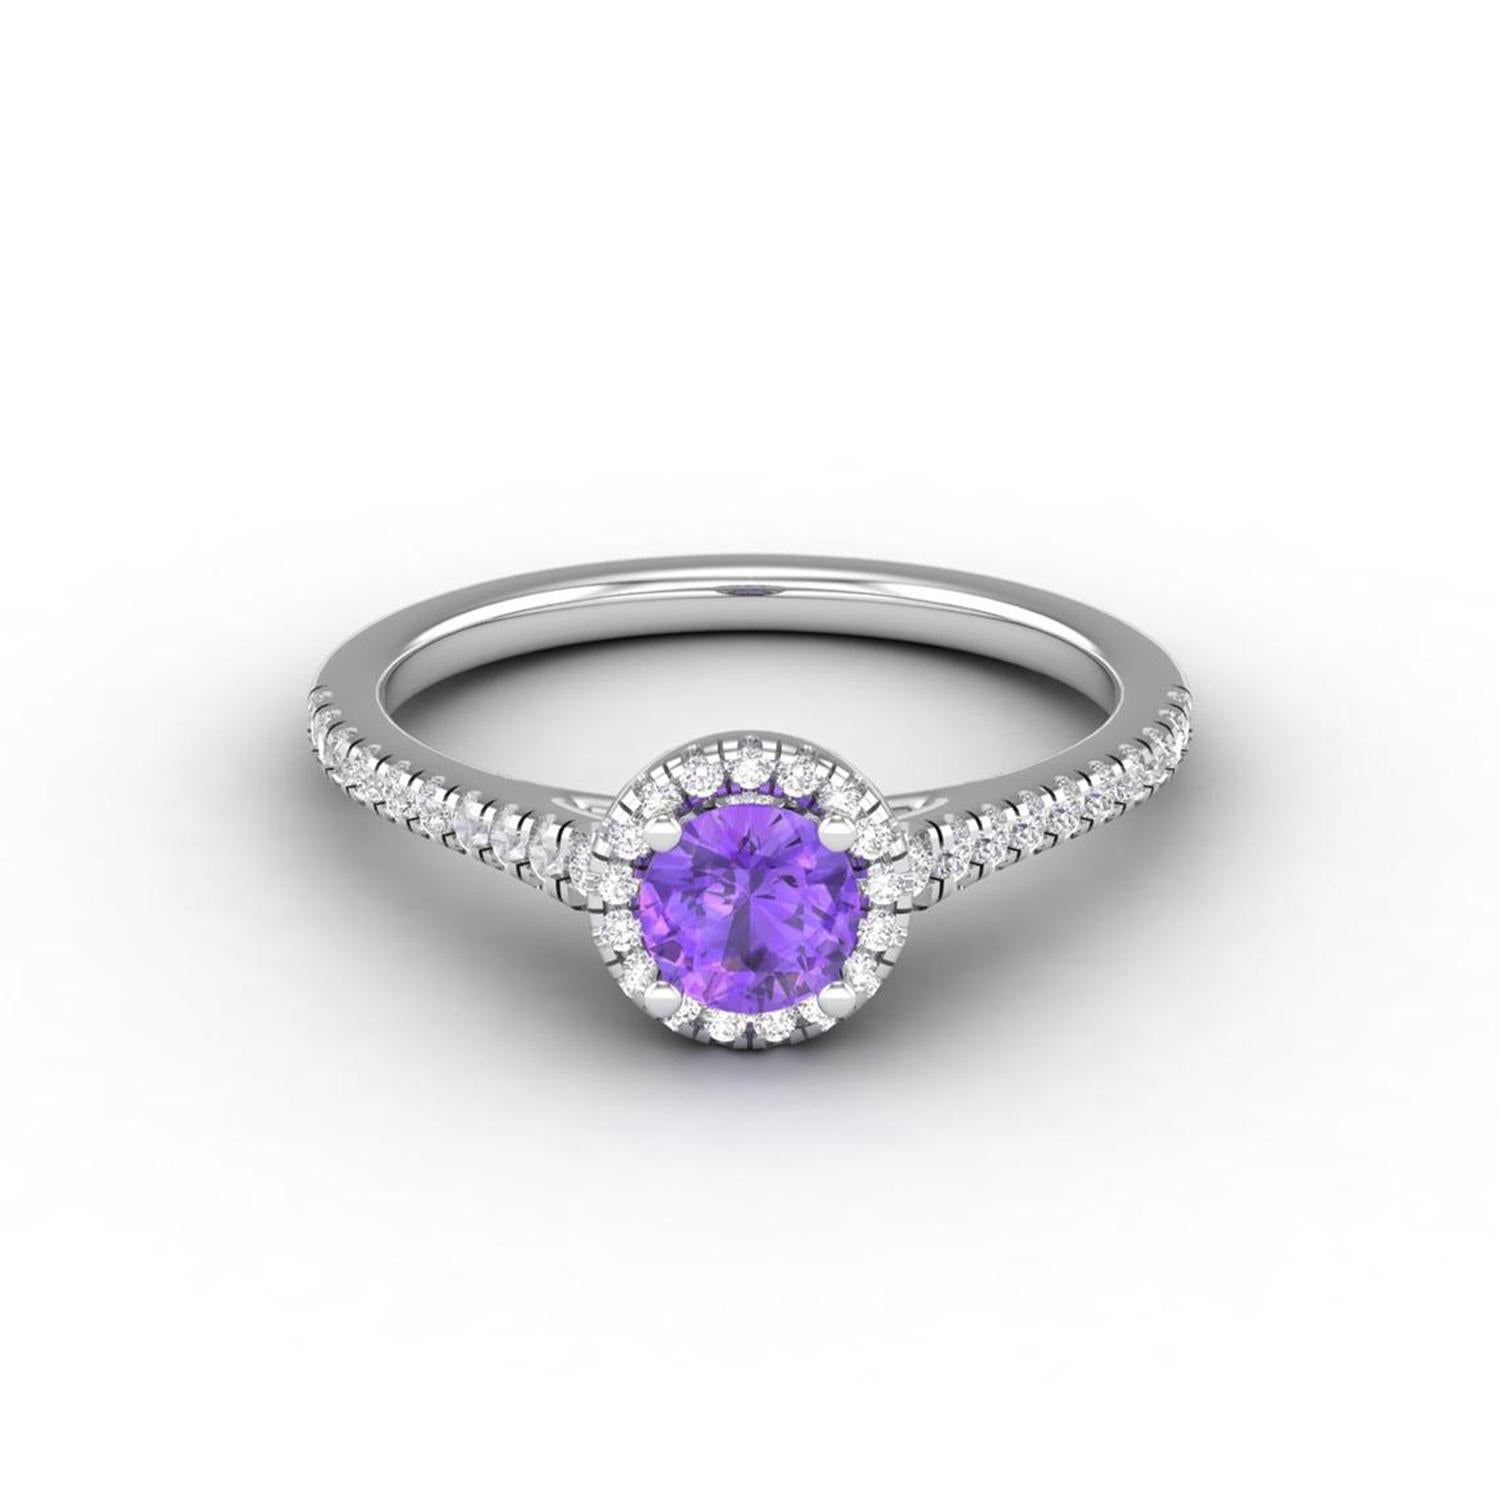 Women's 14 K Gold 5mm Amethyst Ring / Diamond Solitaire Ring / Engagement Ring for Her For Sale